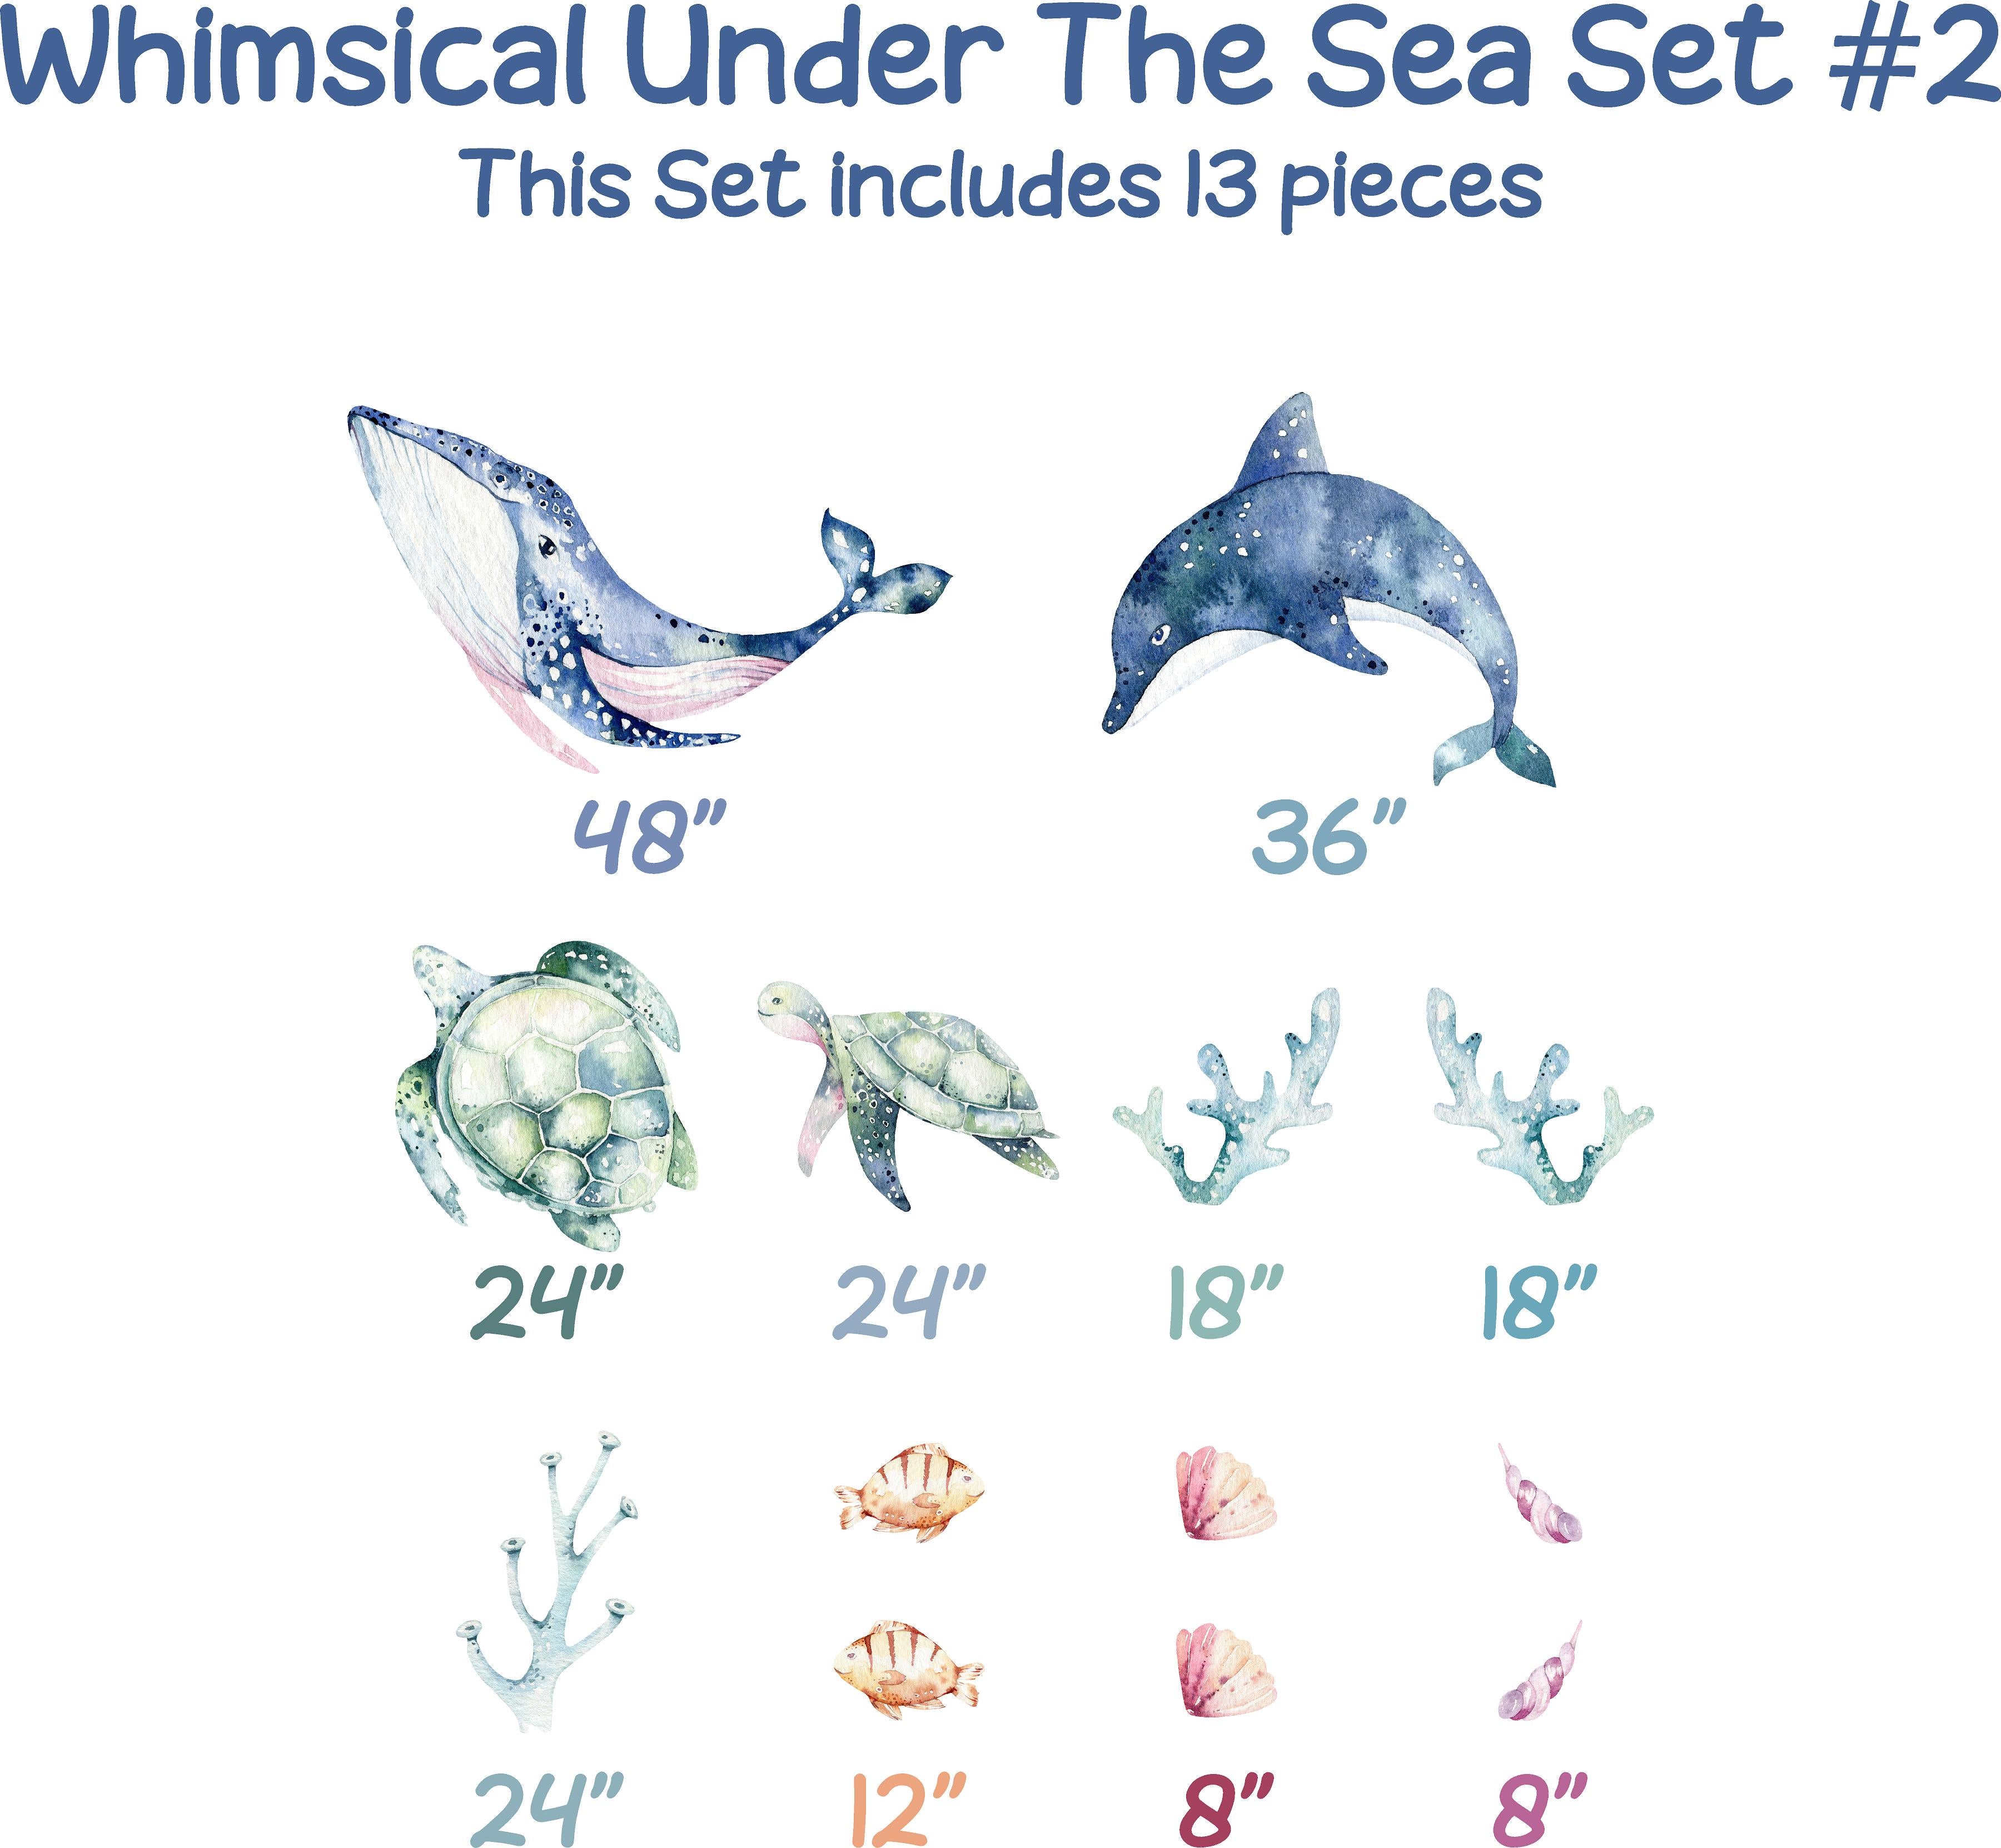 Whimsical Under The Sea Wall Decal Set #2 Ocean Sea Life Removable Fabric Wall Sticker | DecalBaby